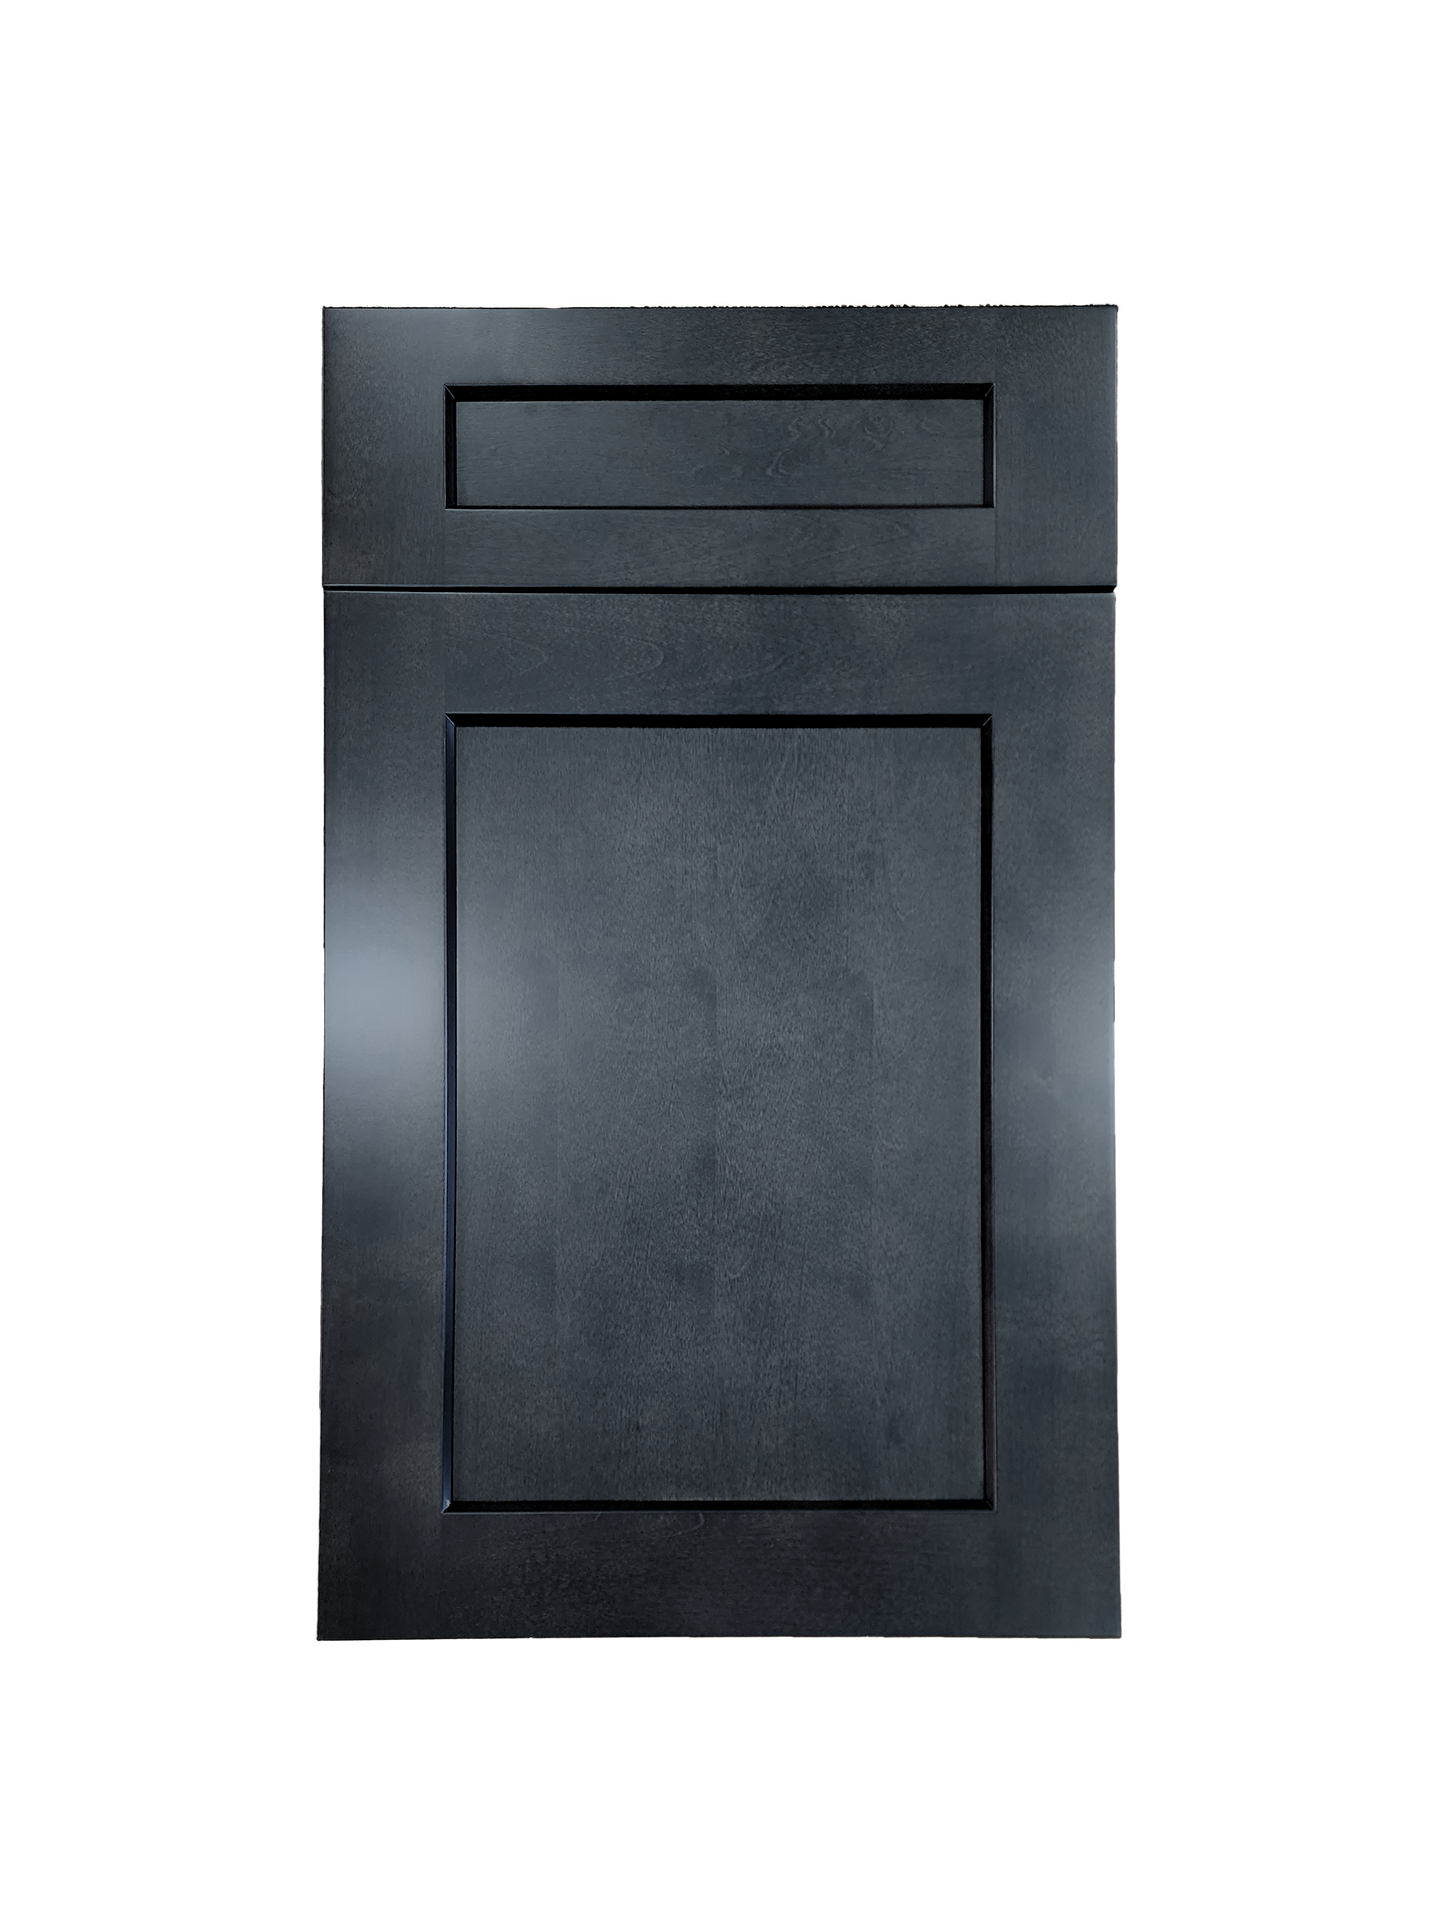 Stormy Grey Wall Refrigerator Cabinet 30 inches wide 24 inches deep 18 inches tall with Stormy Grey box and Stormy Grey doors